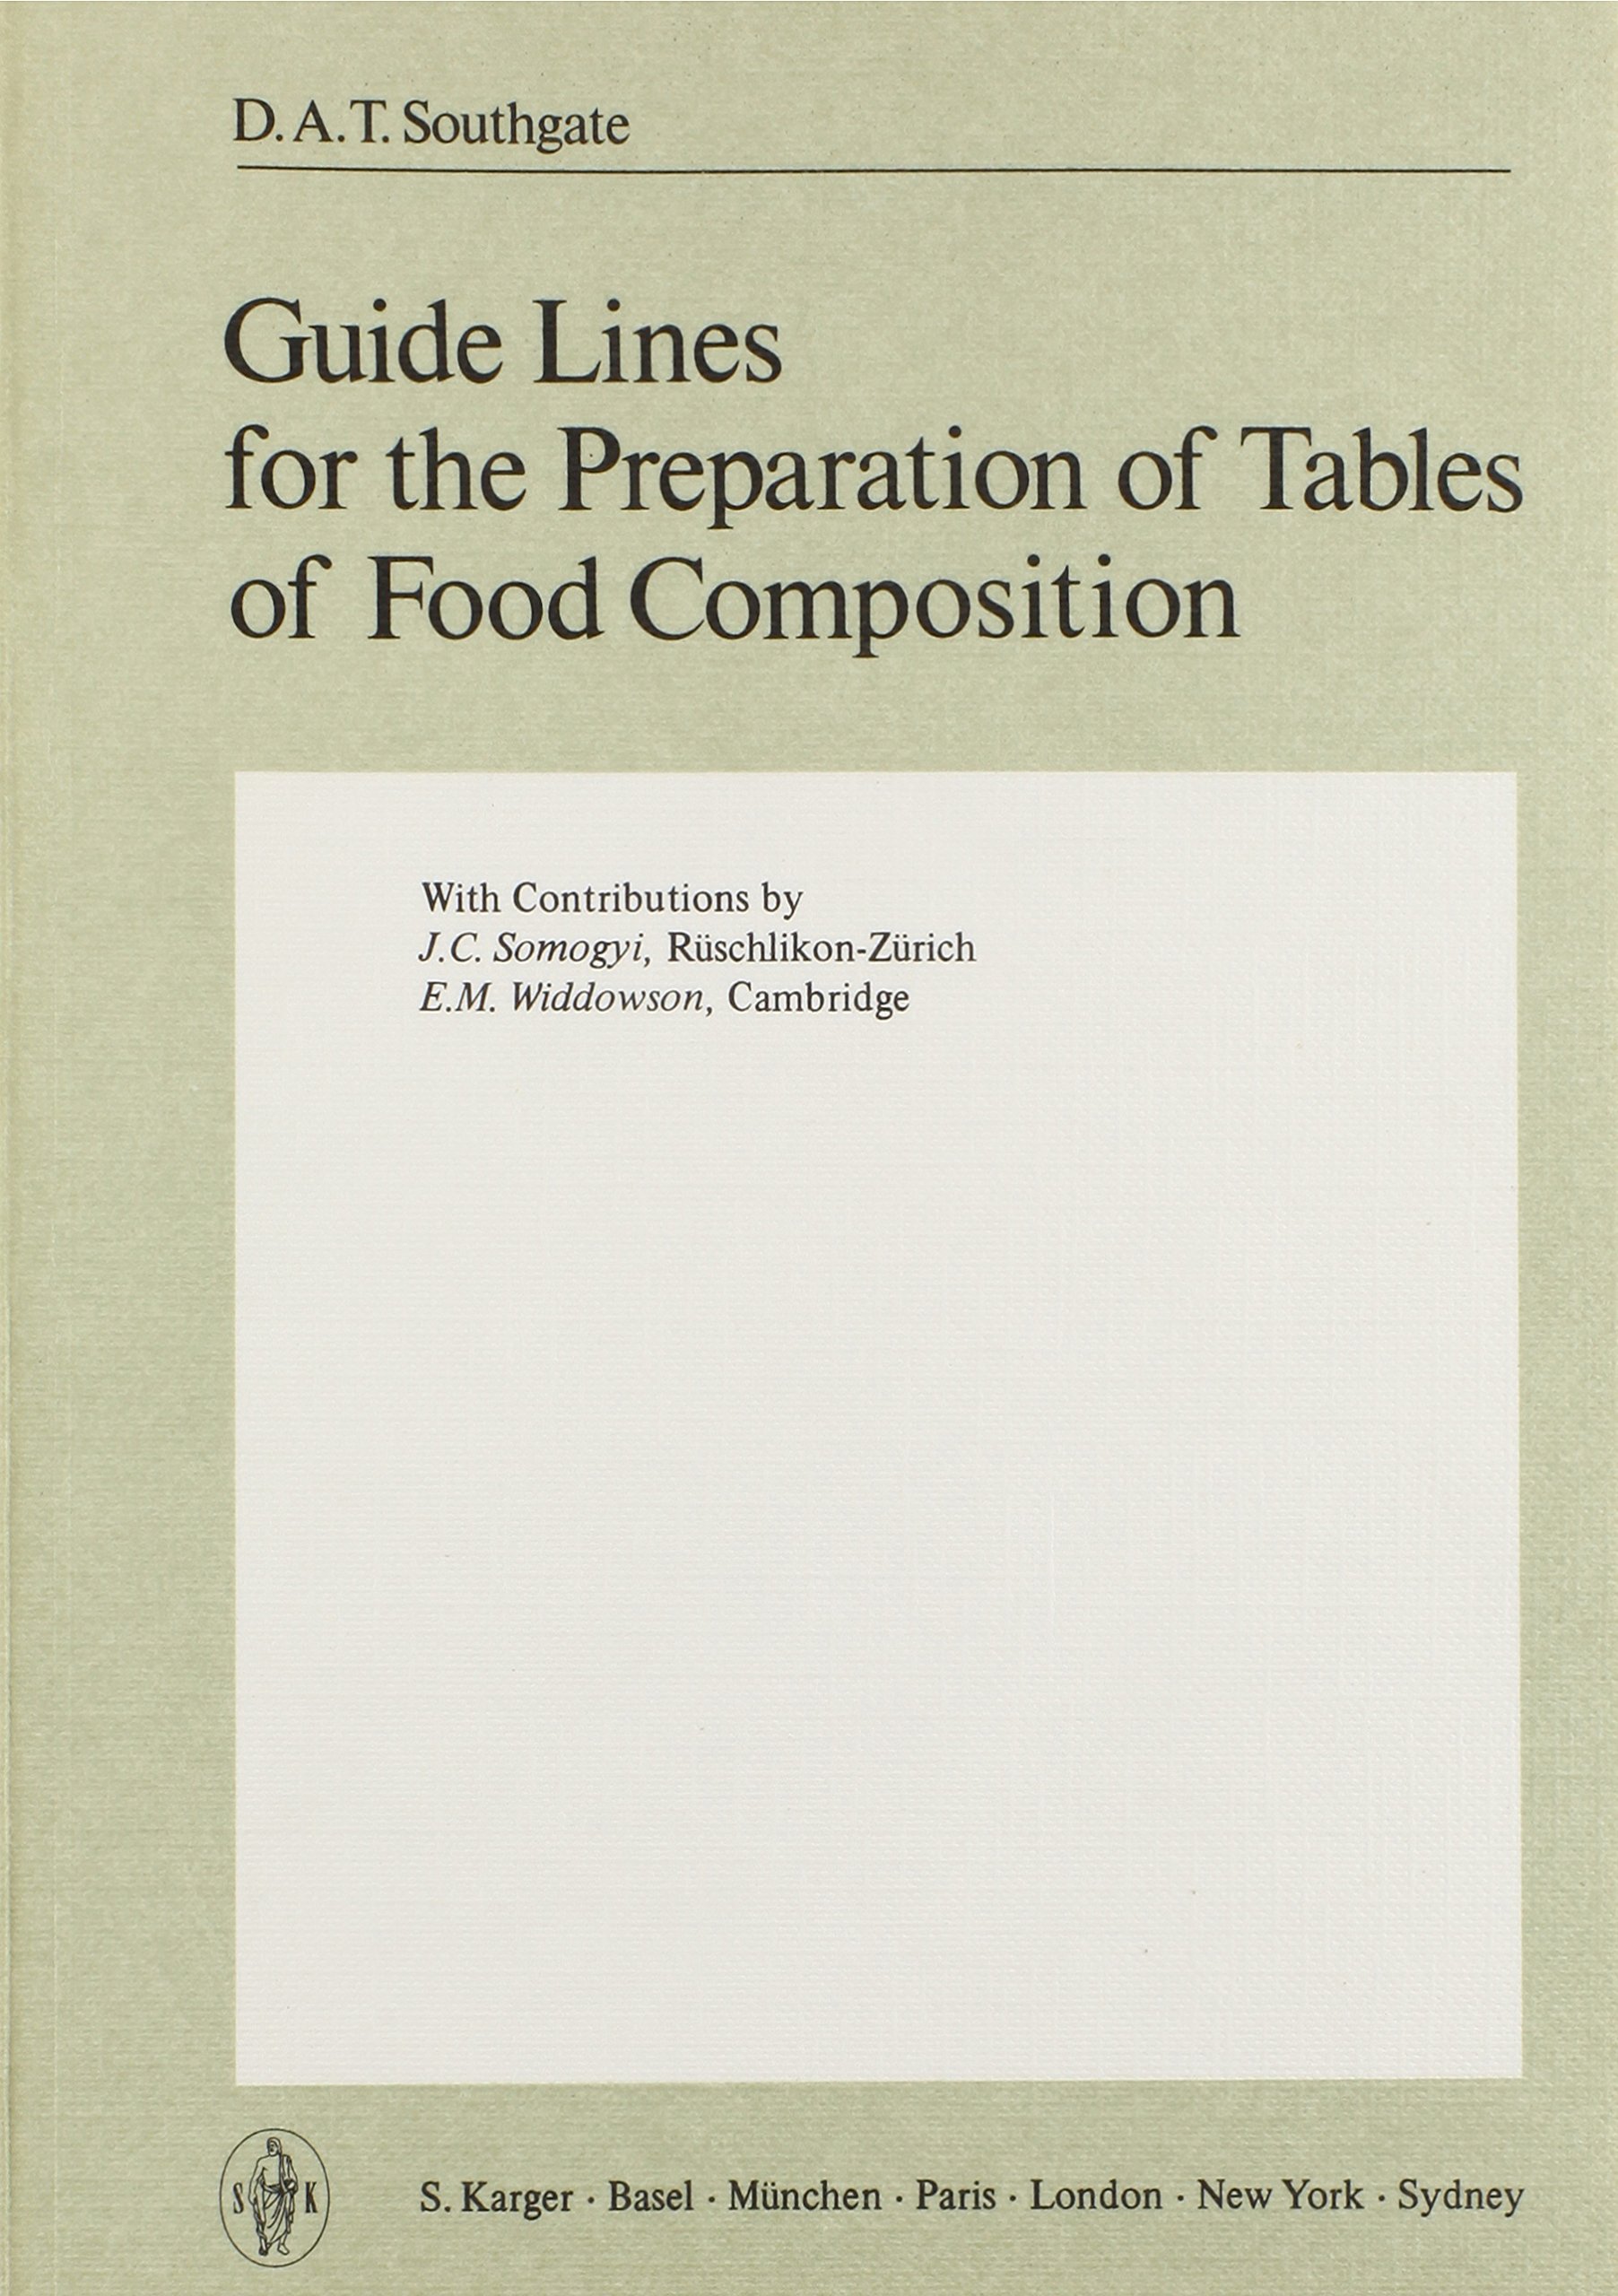 Guide Lines for the Preparation of Tables of Food Composition